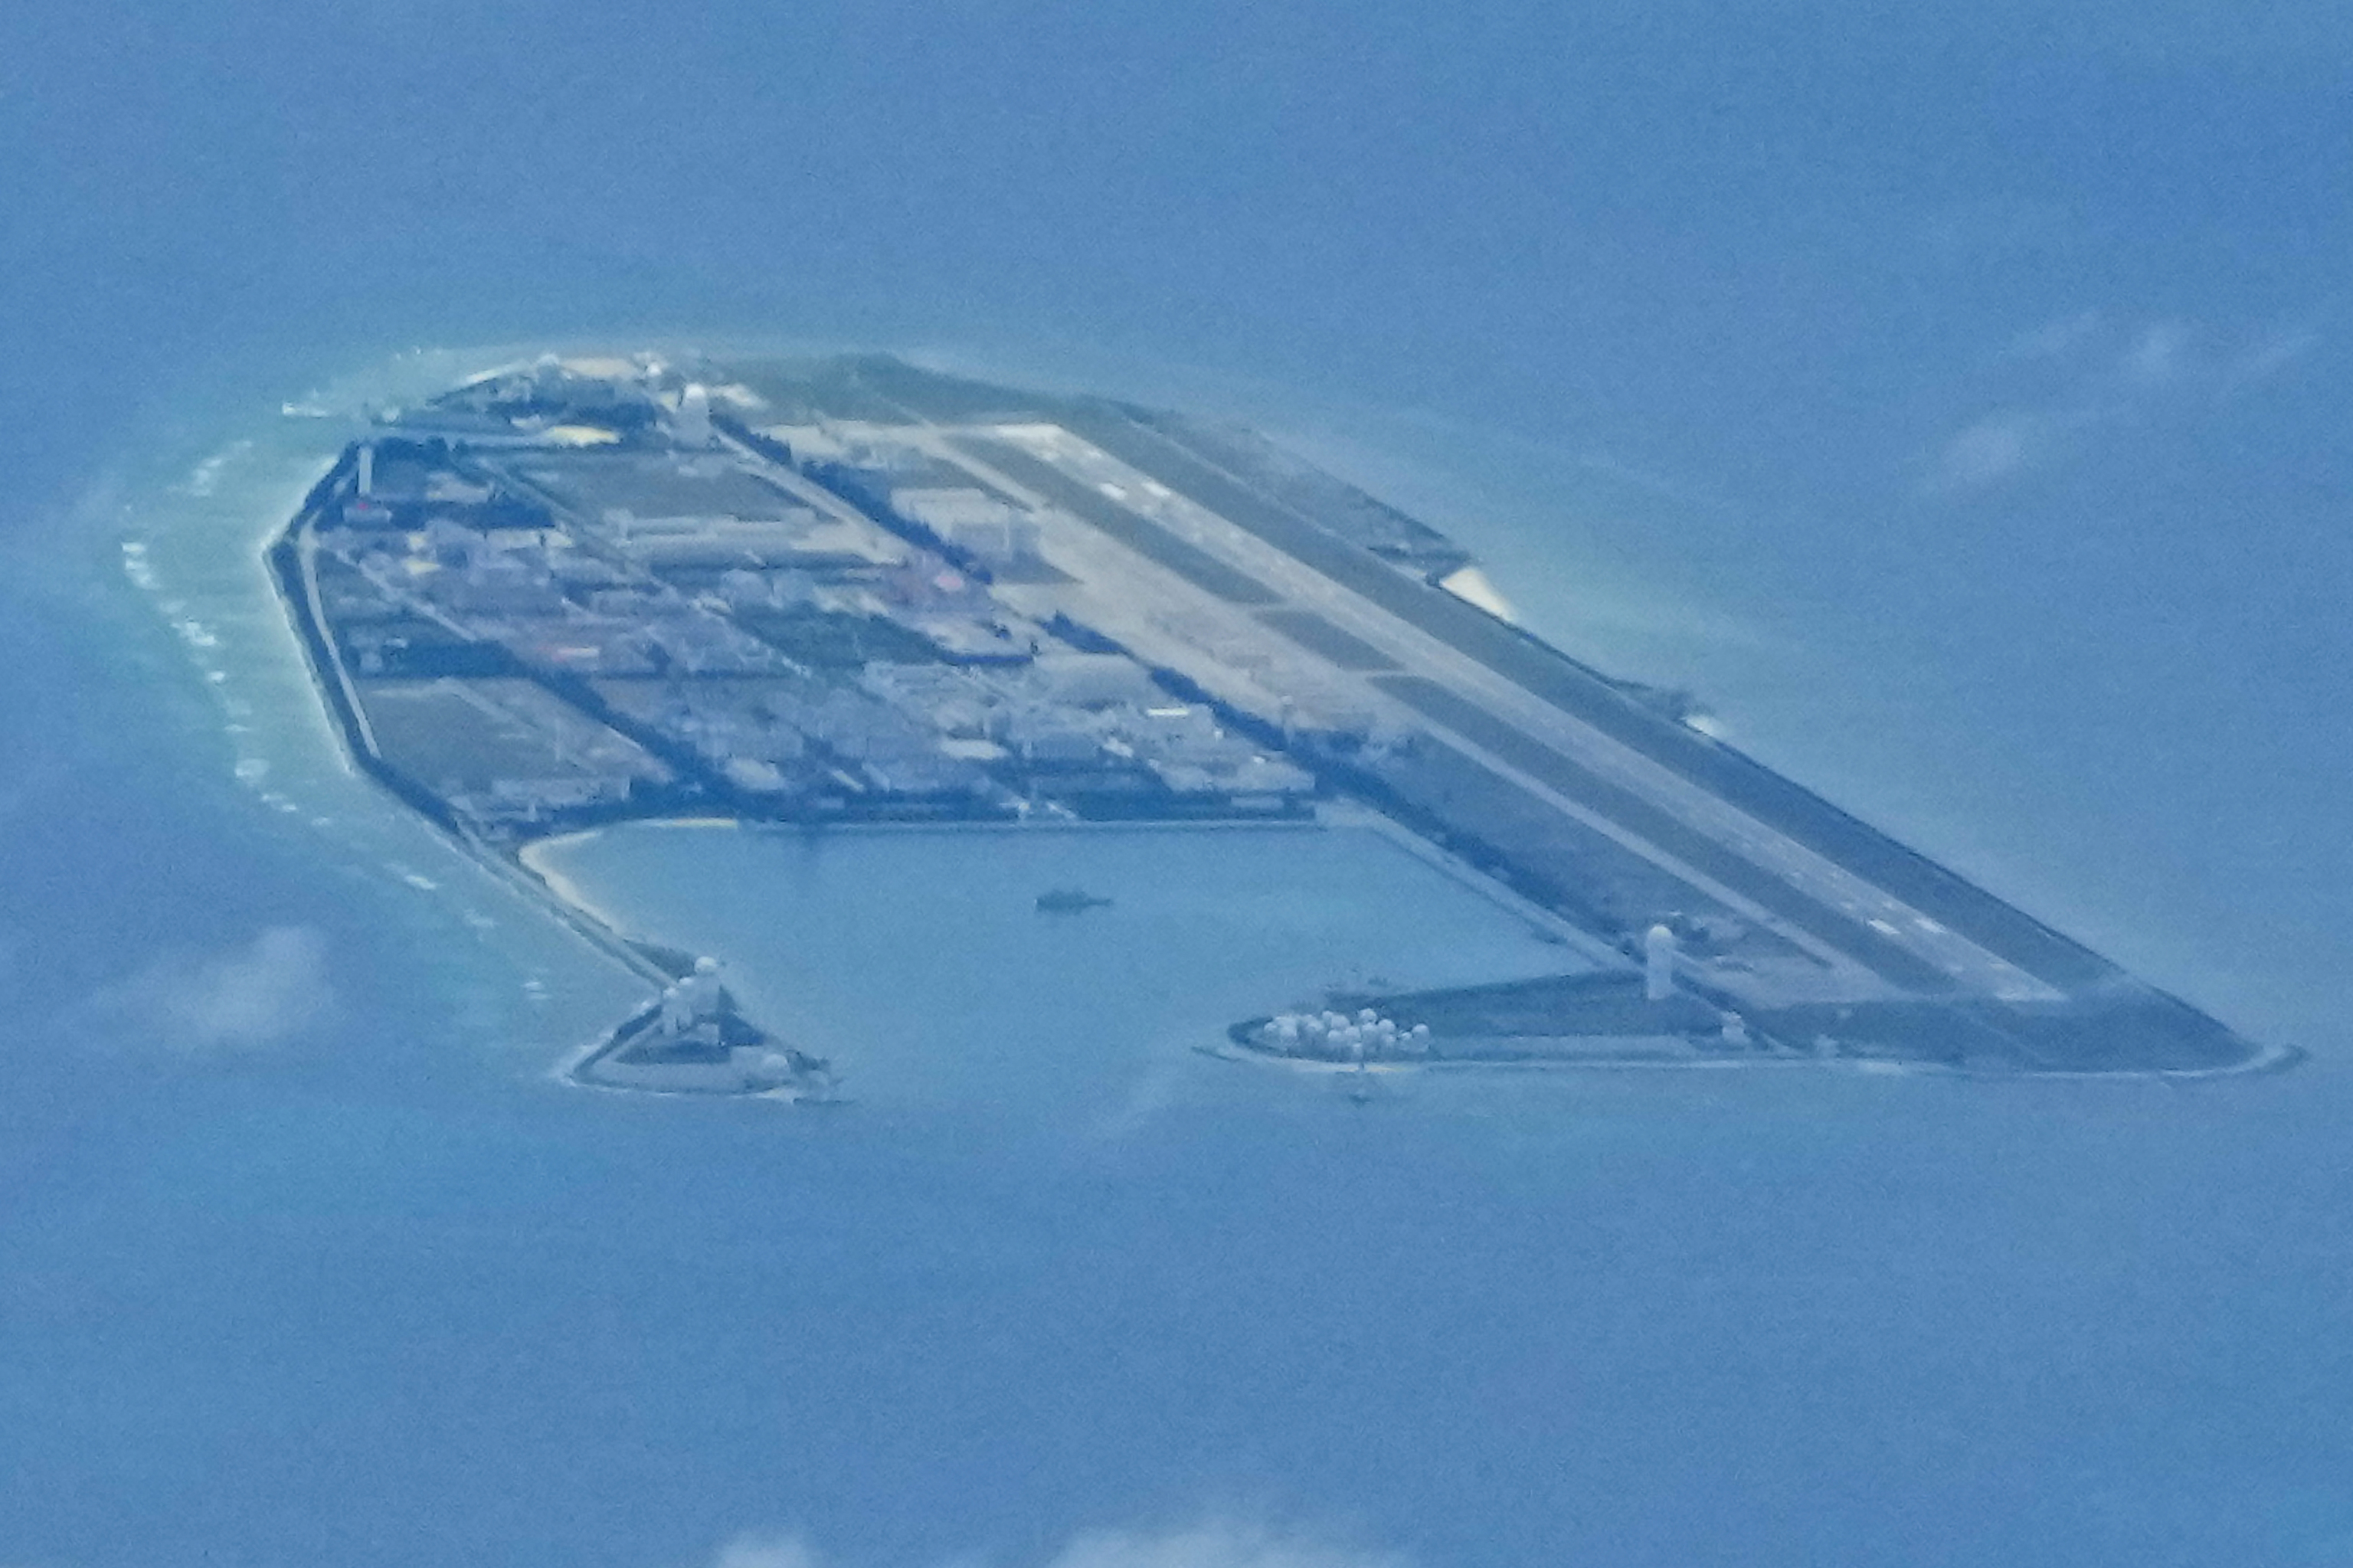 Chinese construction in the disputed Spratly Islands.